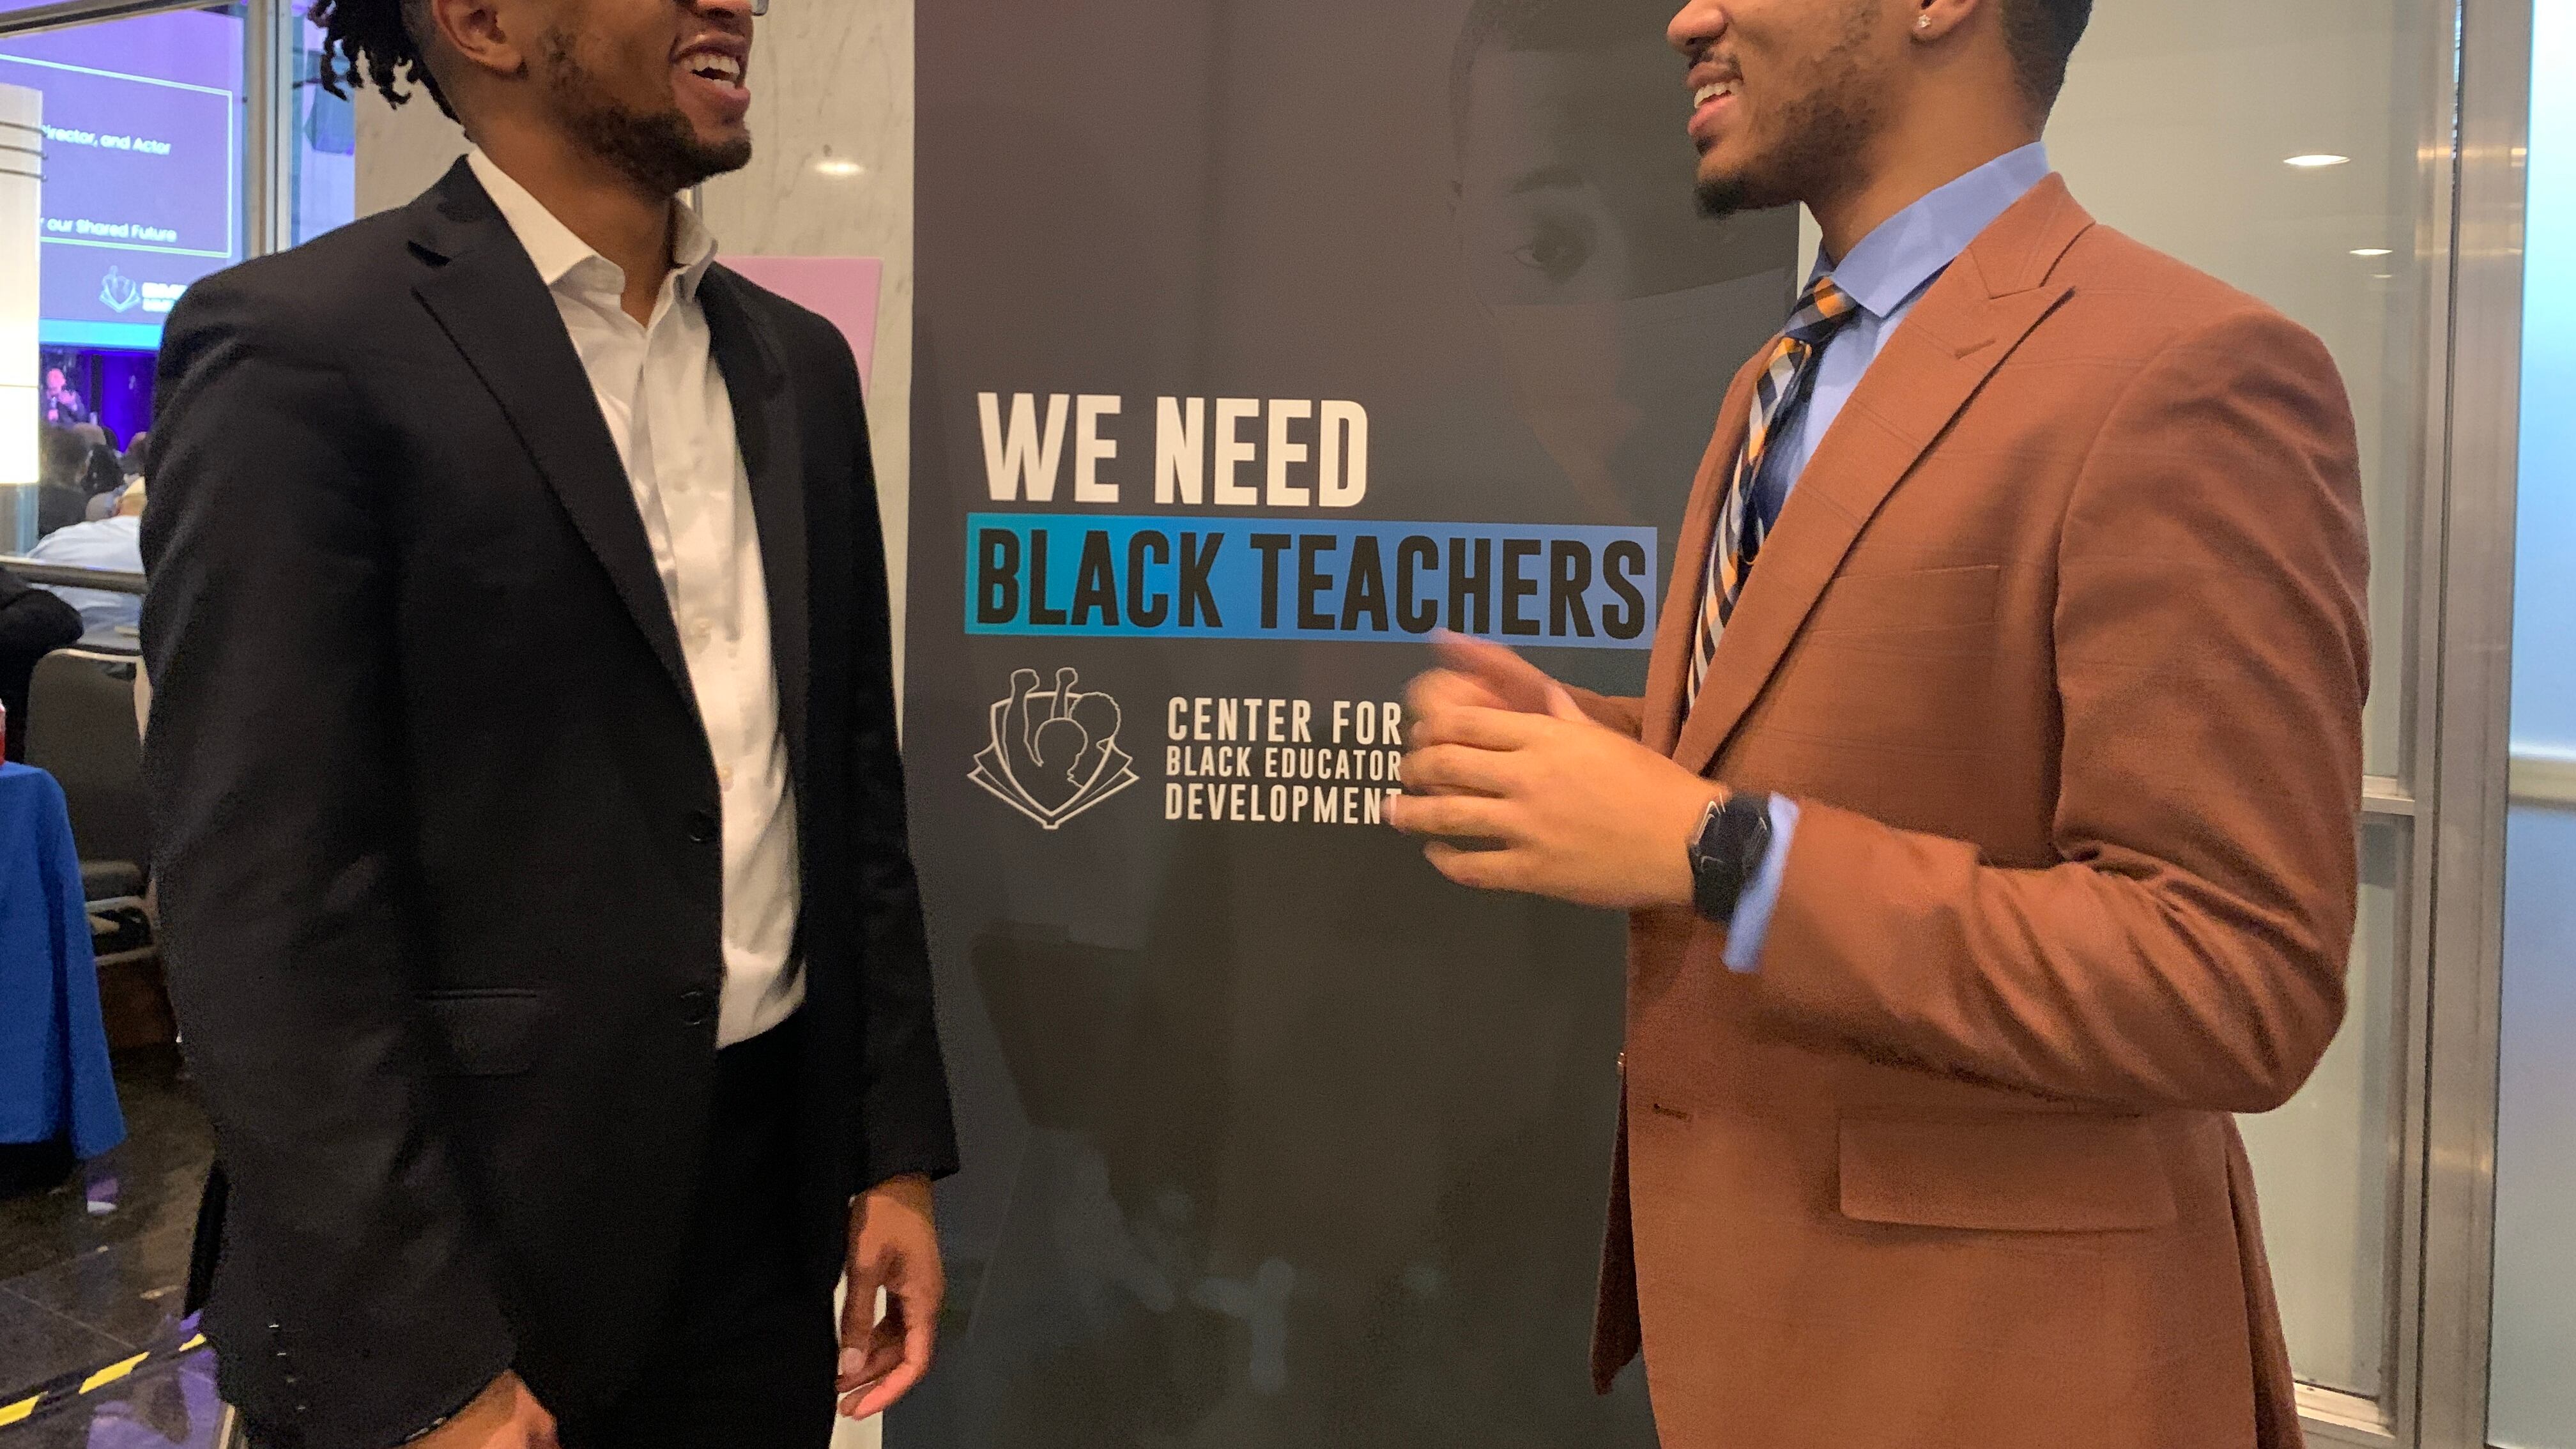 Two Black men - one in a dark jacket and the other in a tan jacket - talk in front of a sign that says “We Need Black Teachers.”